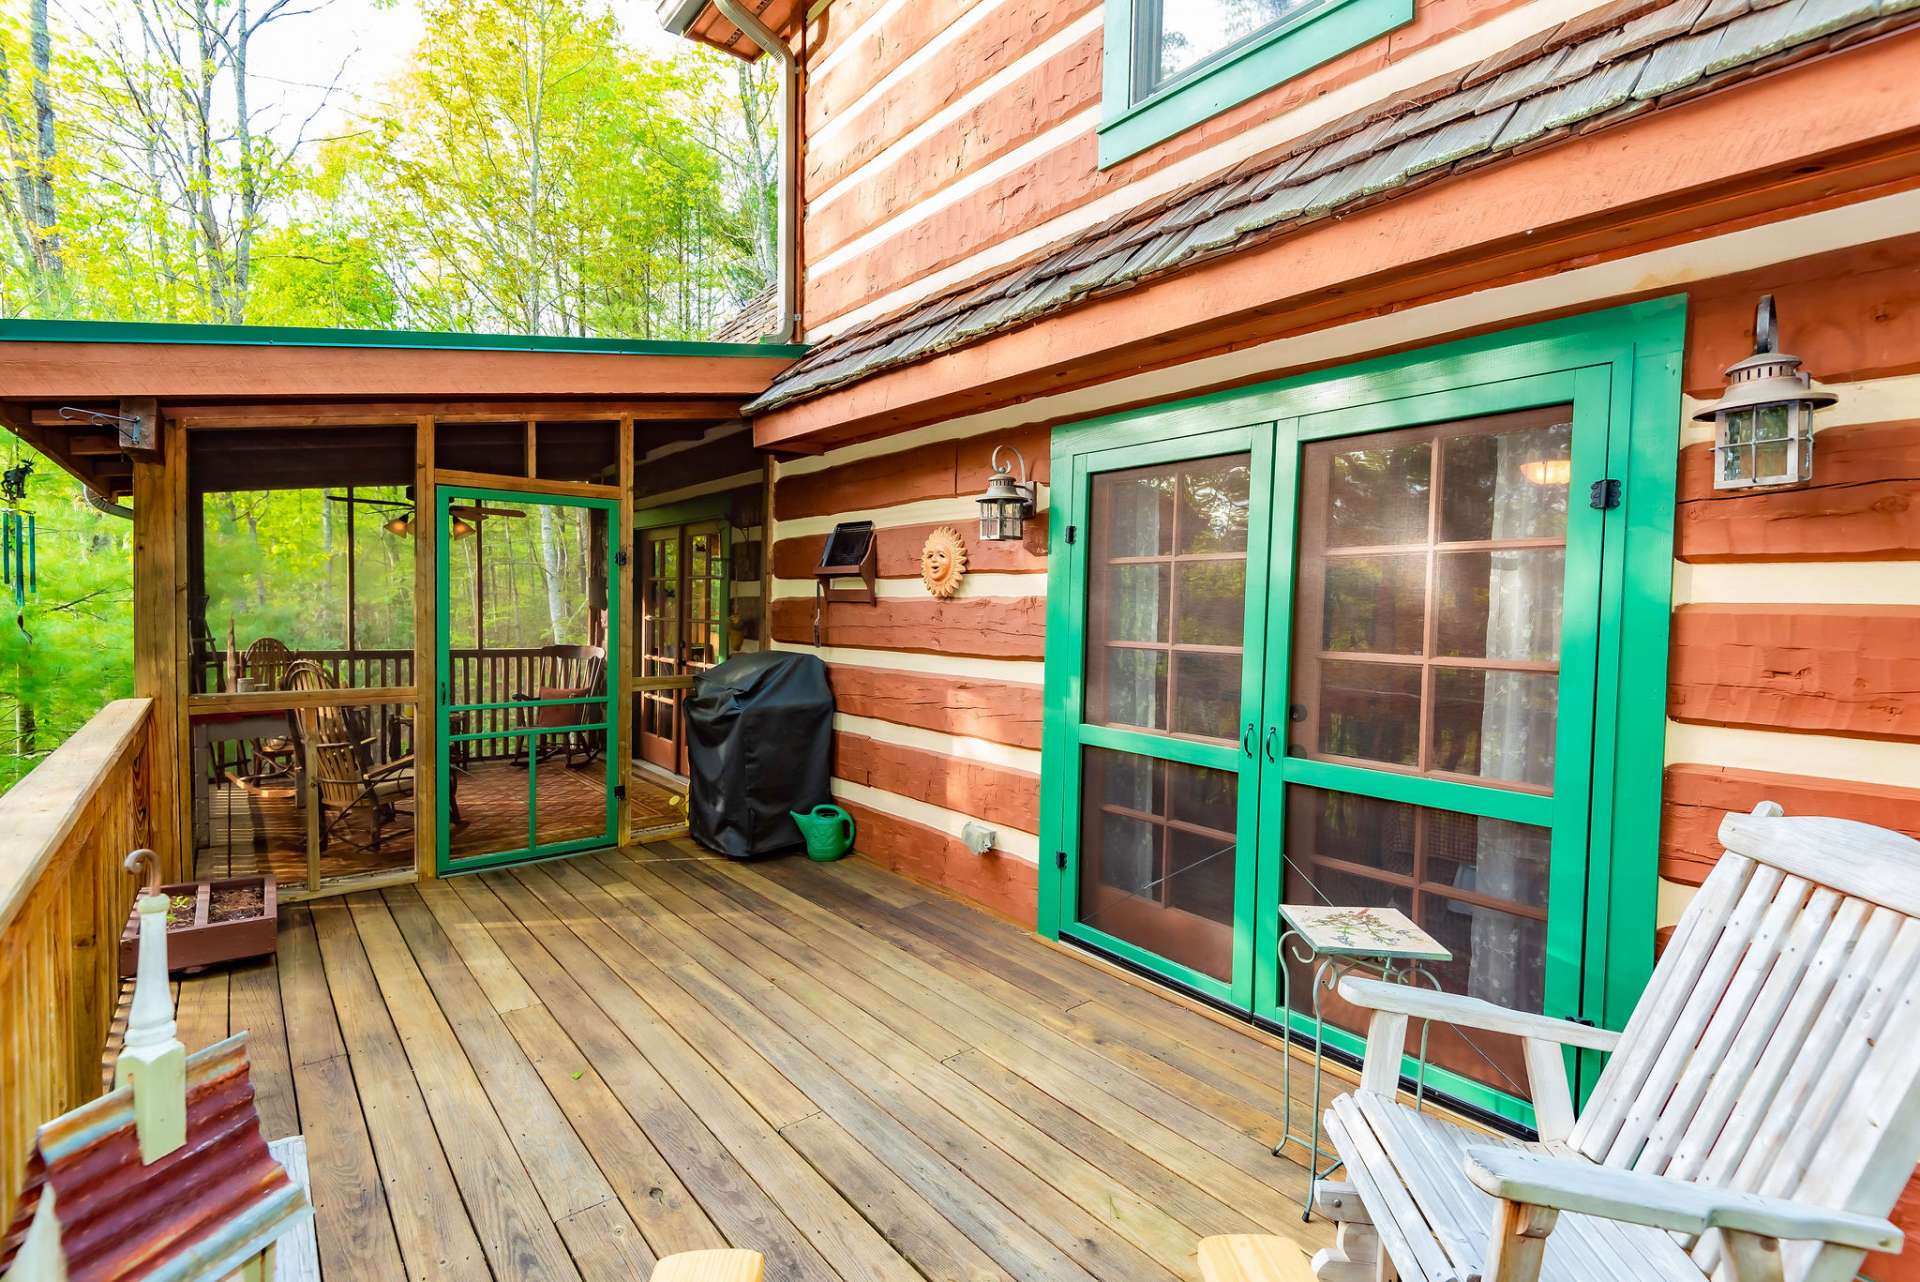 The main level offers a partially covered deck with screened area.